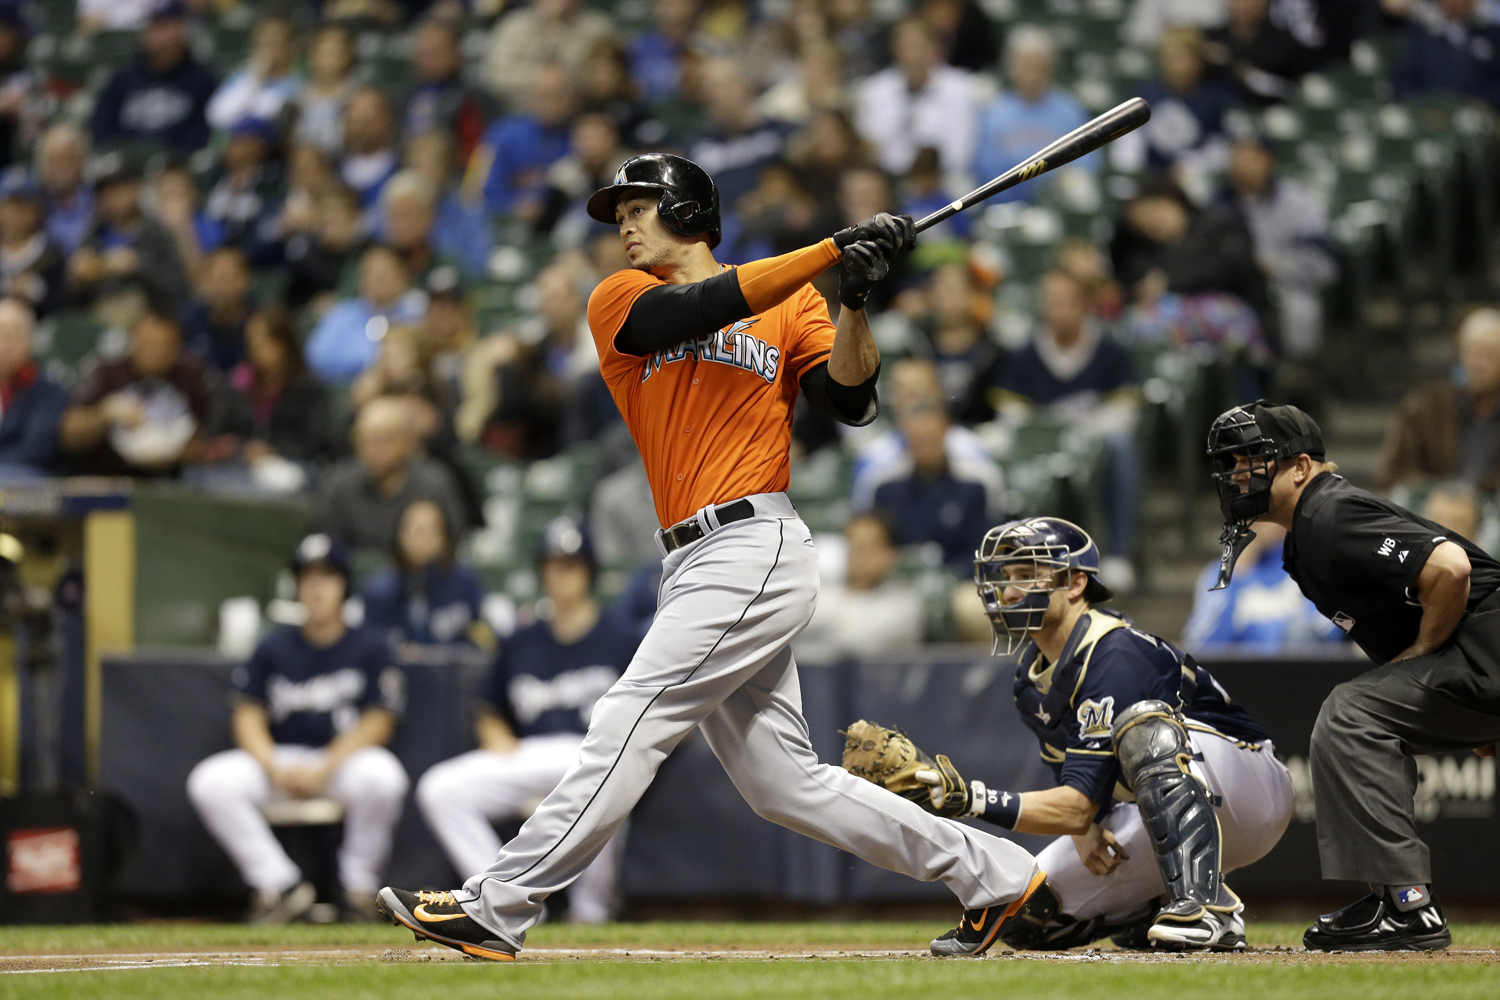 Giancarlo Stanton of the Miami Marlins makes some contact at the plate during a game against the Milwaukee Brewers at Miller Park on September 11, 2014 in Milwaukee, Wisconsin. (Mike McGinnis — Getty Images)